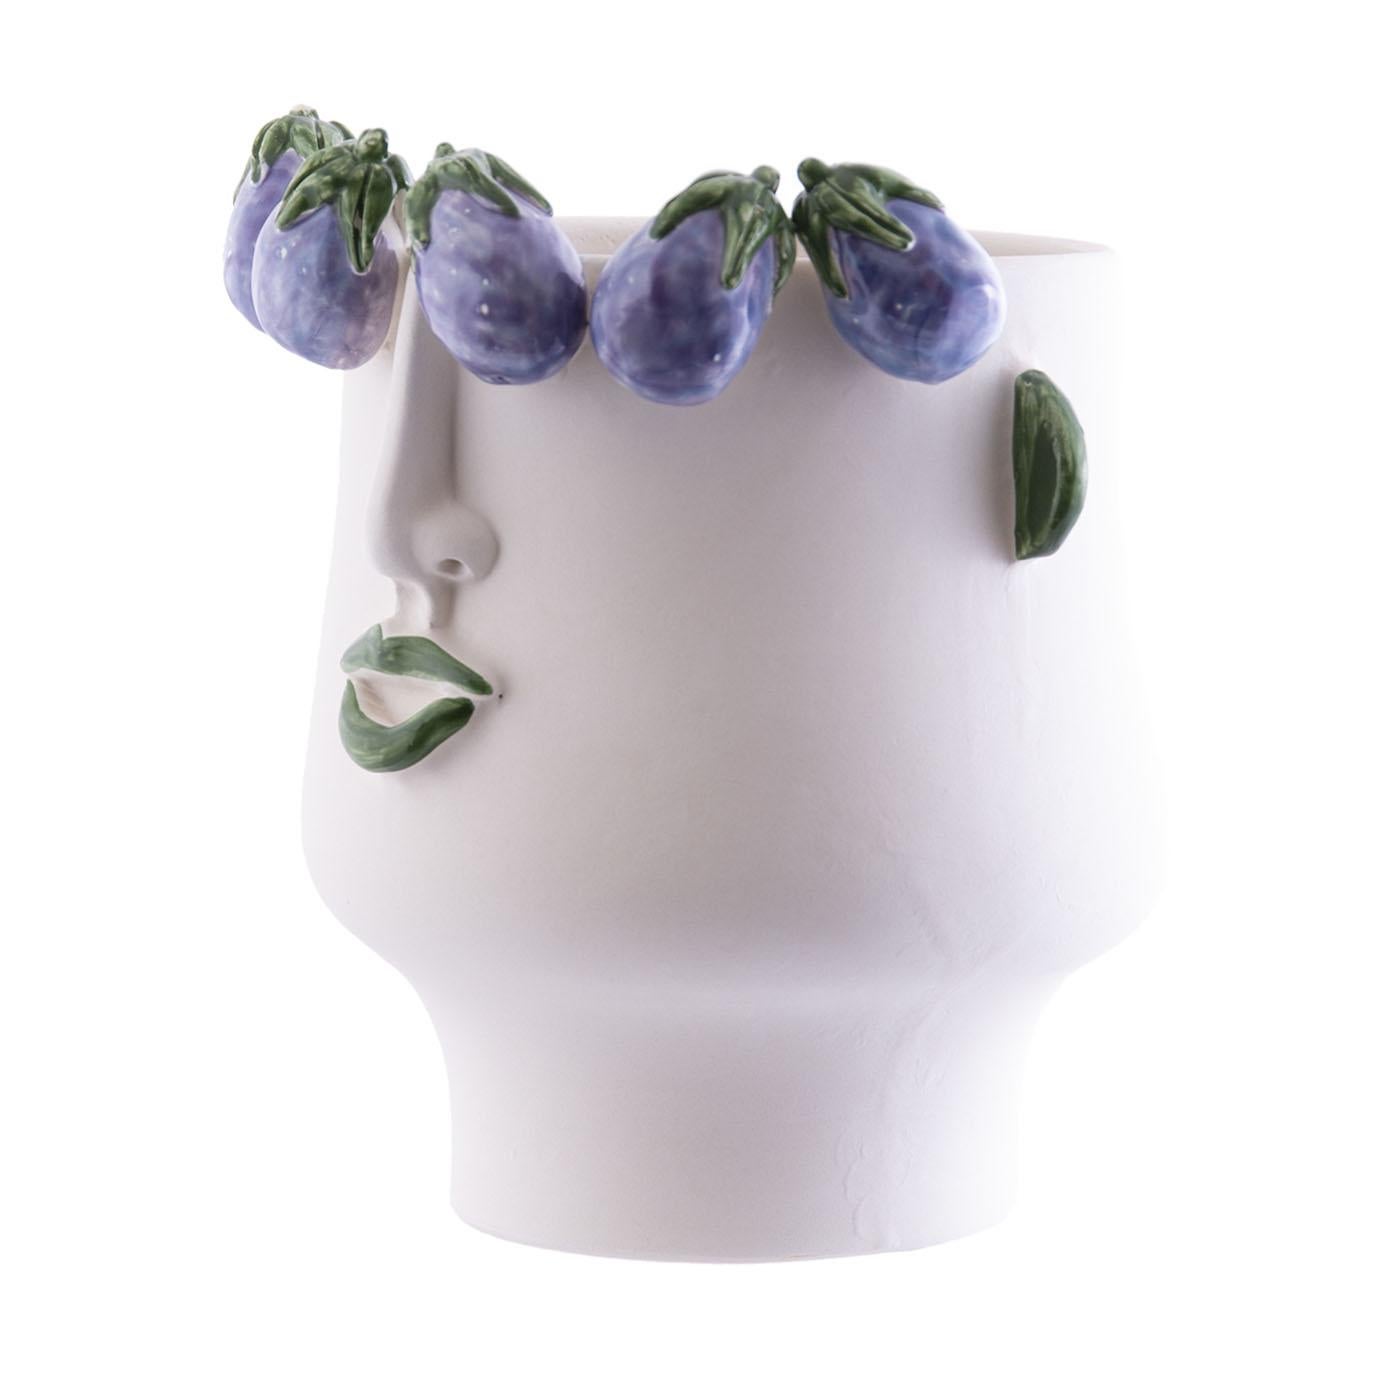 The second fire-fired ceramic head, handmade with face and aubergine reliefs, can be used to contain plants, flowers and sometimes even bottles with ice. 